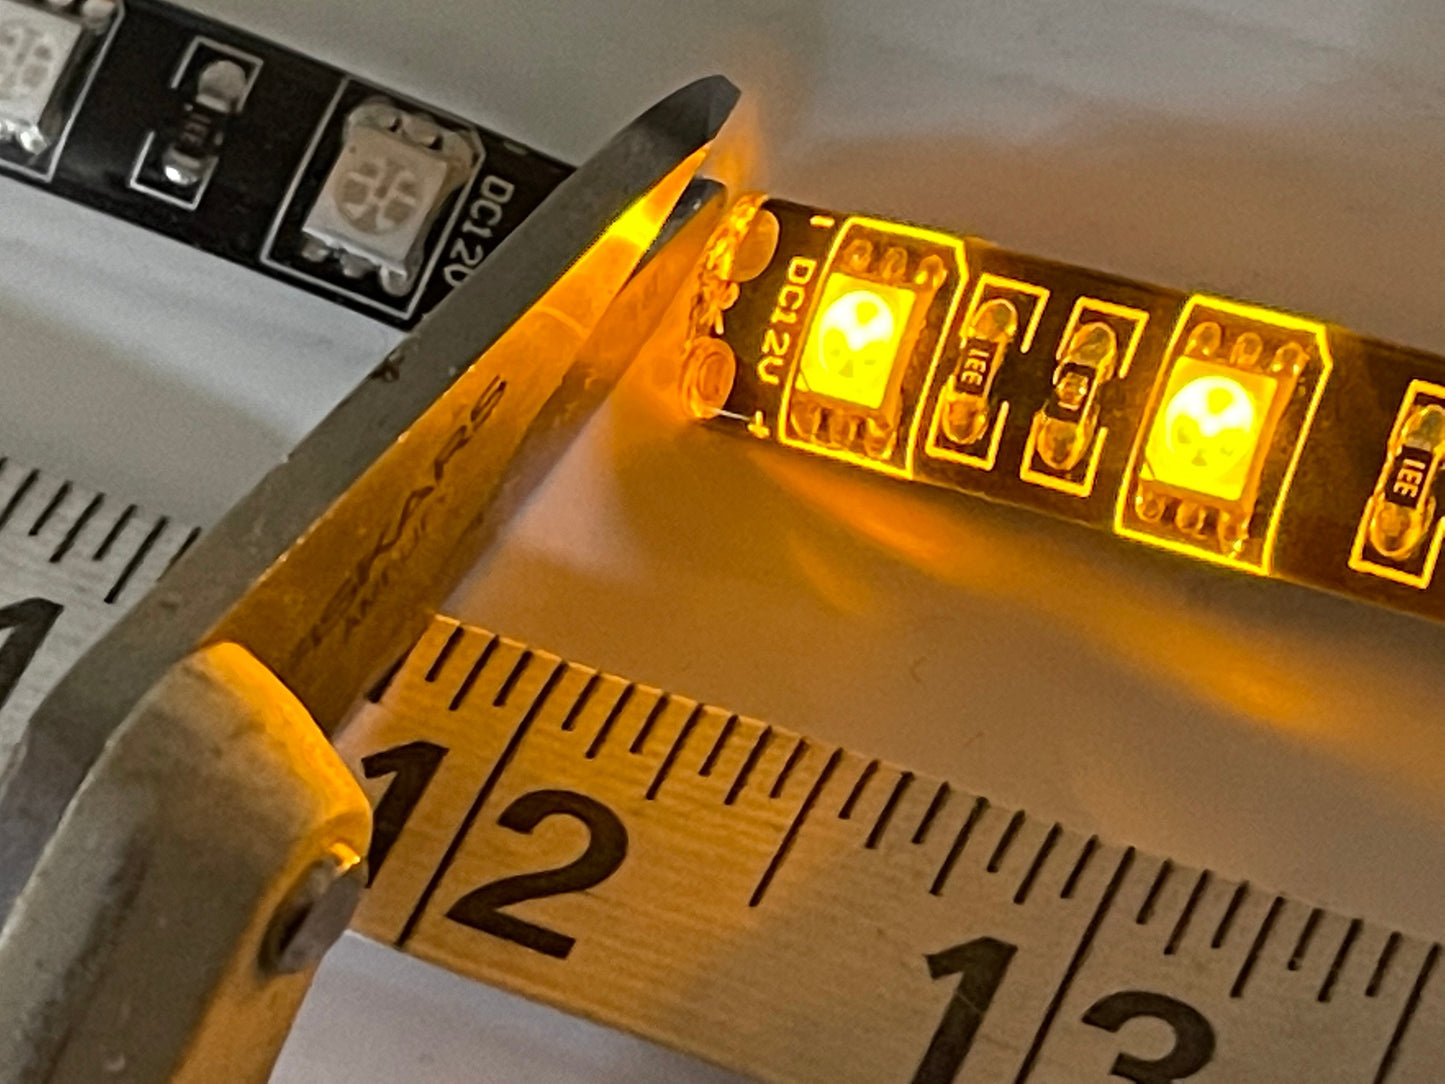 3 LED strips into 1 Battery 9V Connector - Steady On - Cuttable Project Cosplay Lights